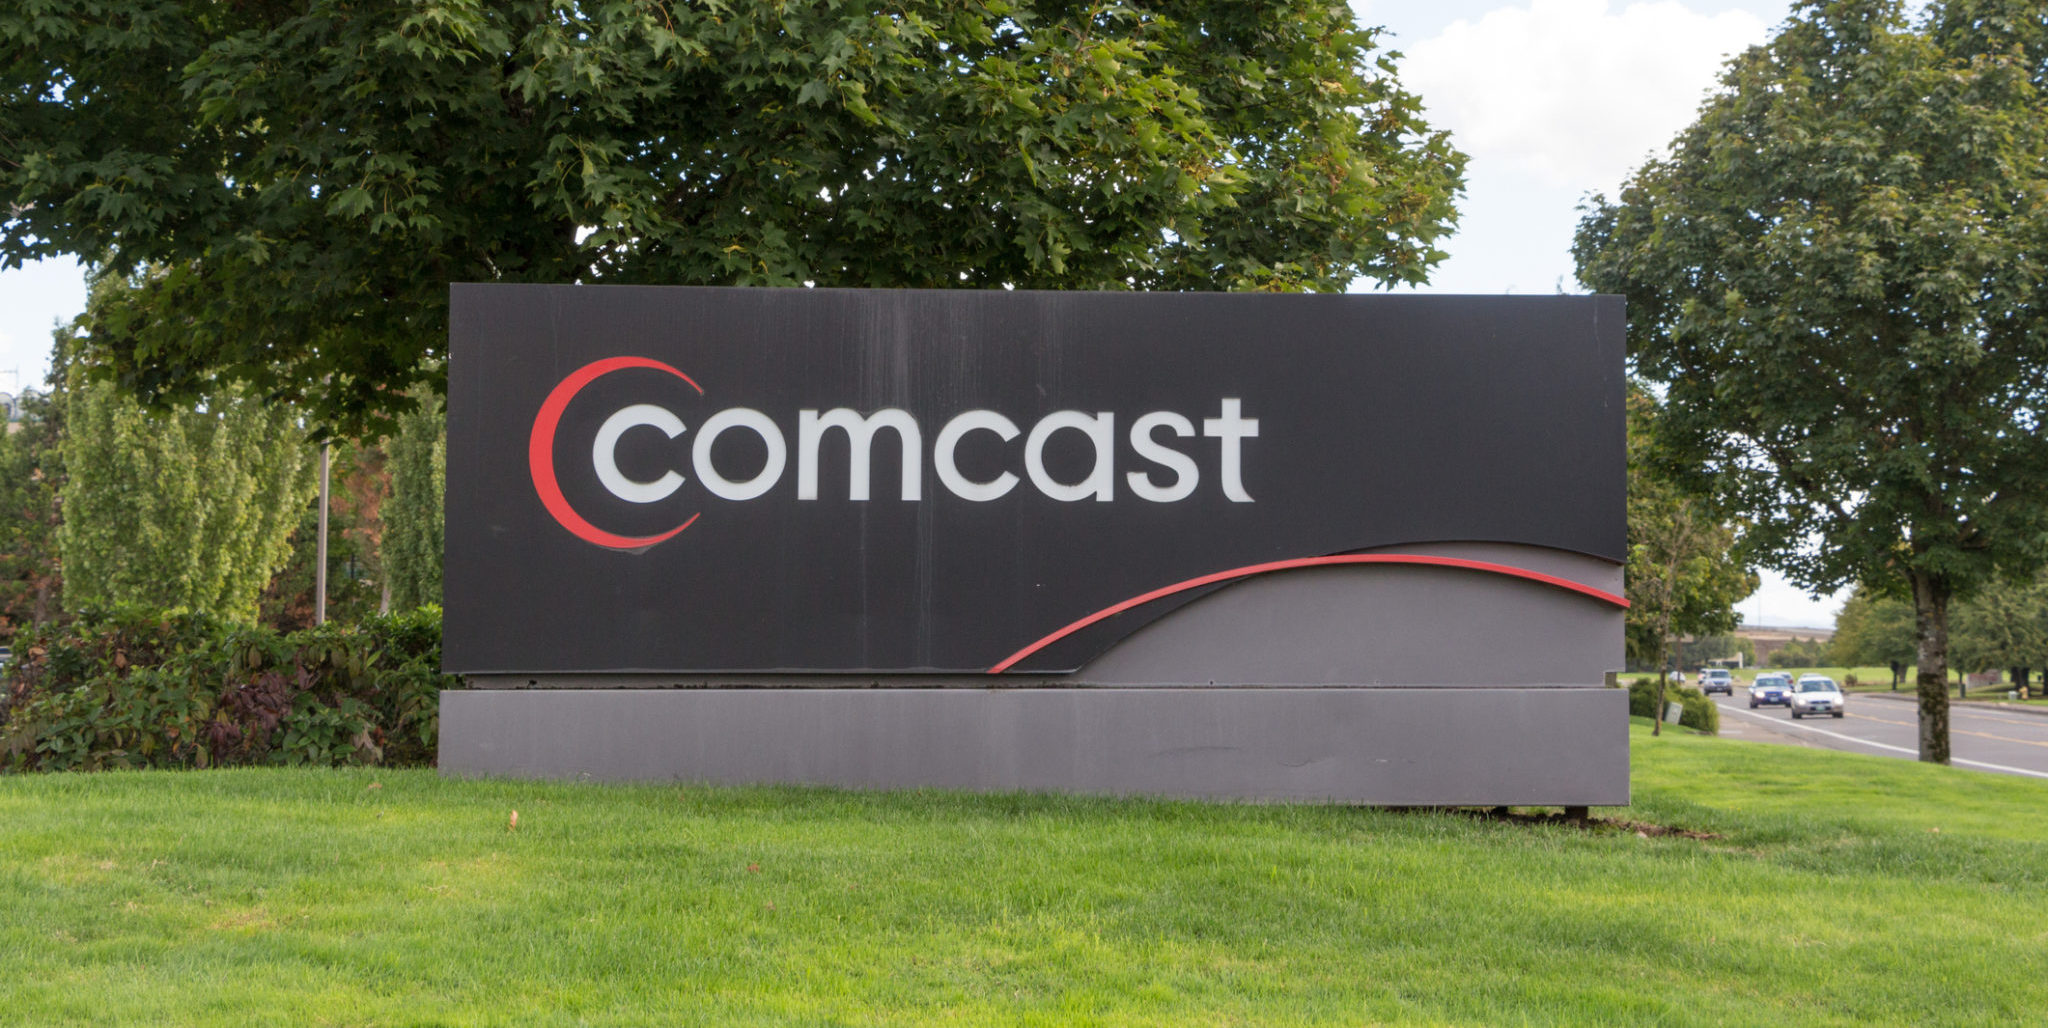 Comcast Lost 149,000 TV Subscribers in 4th Quarter 2019